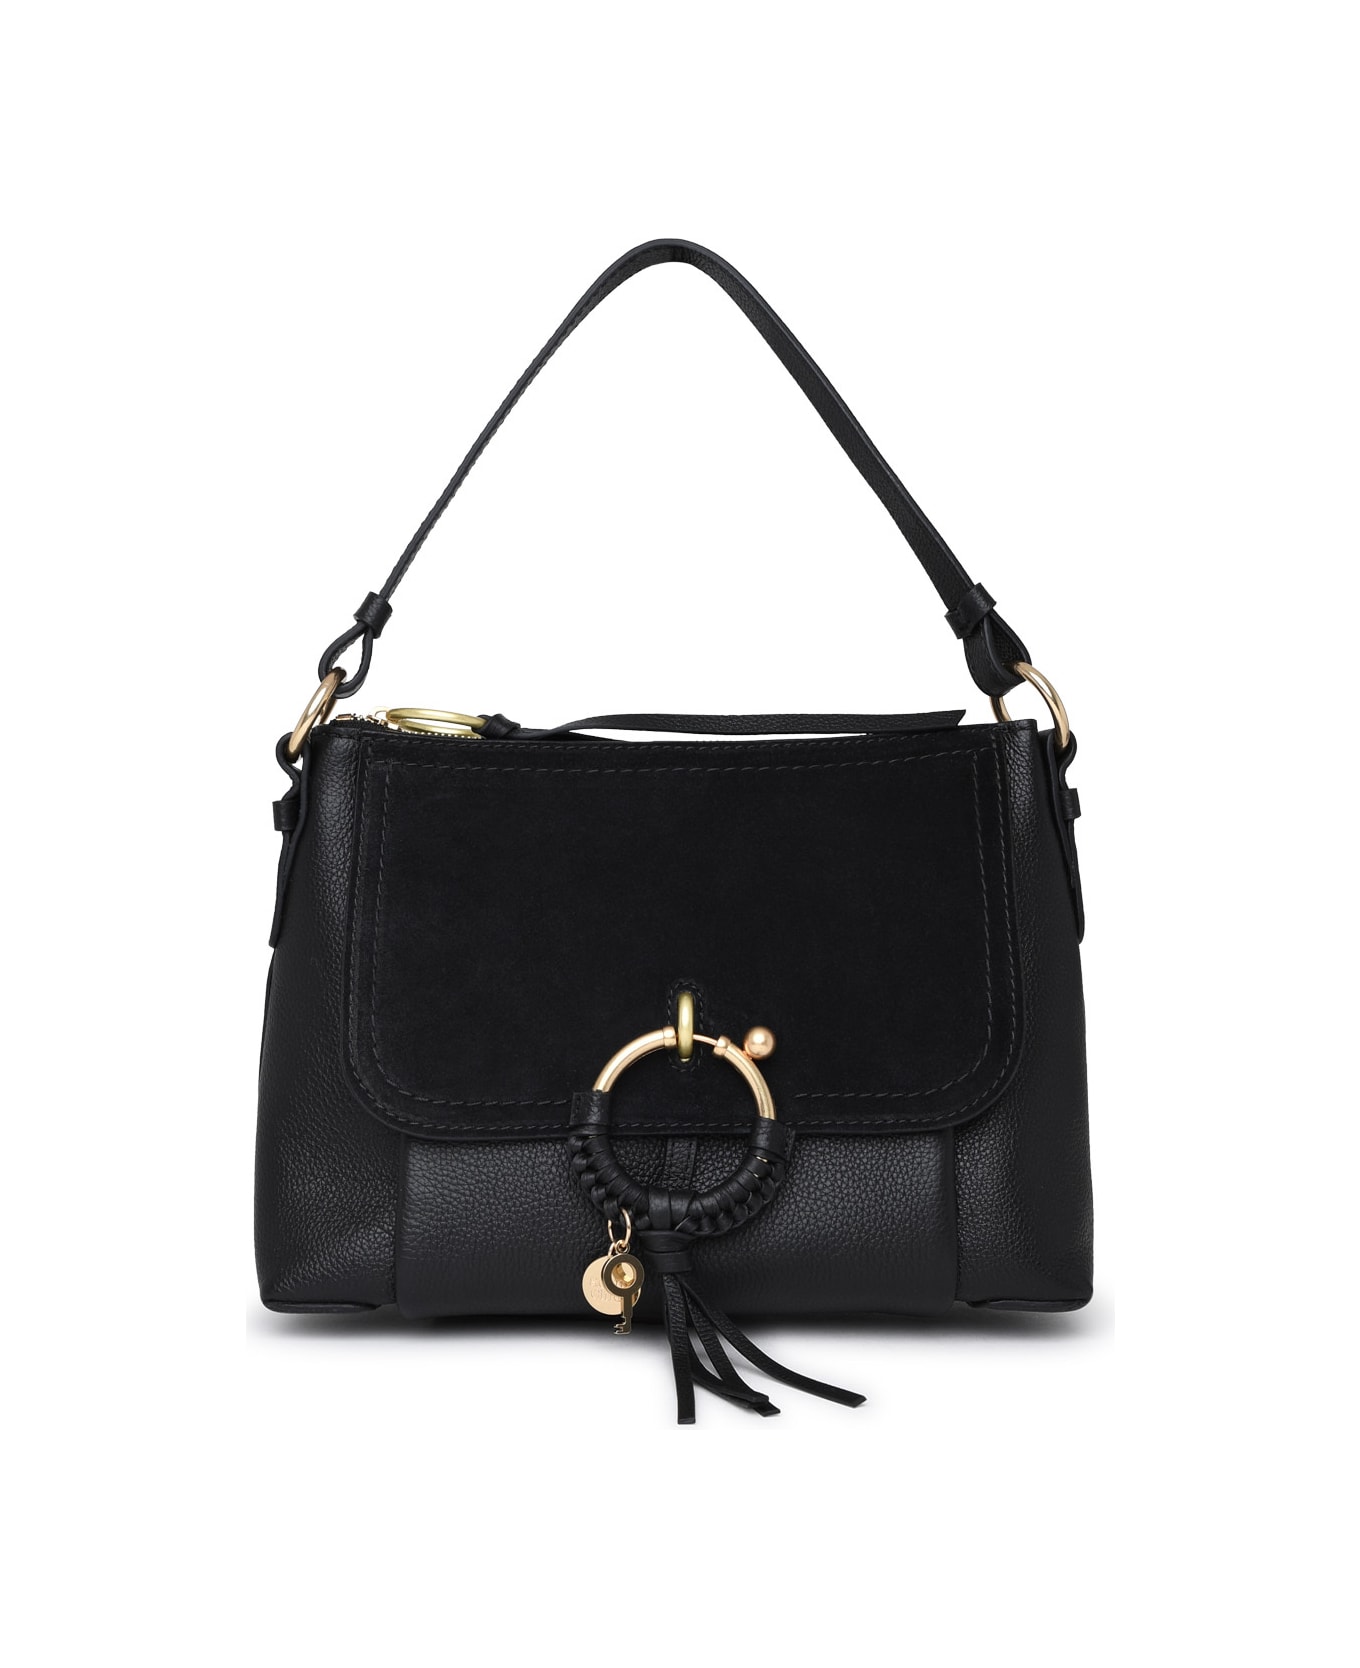 See by Chloé Black Leather Small Joan Bag - Black